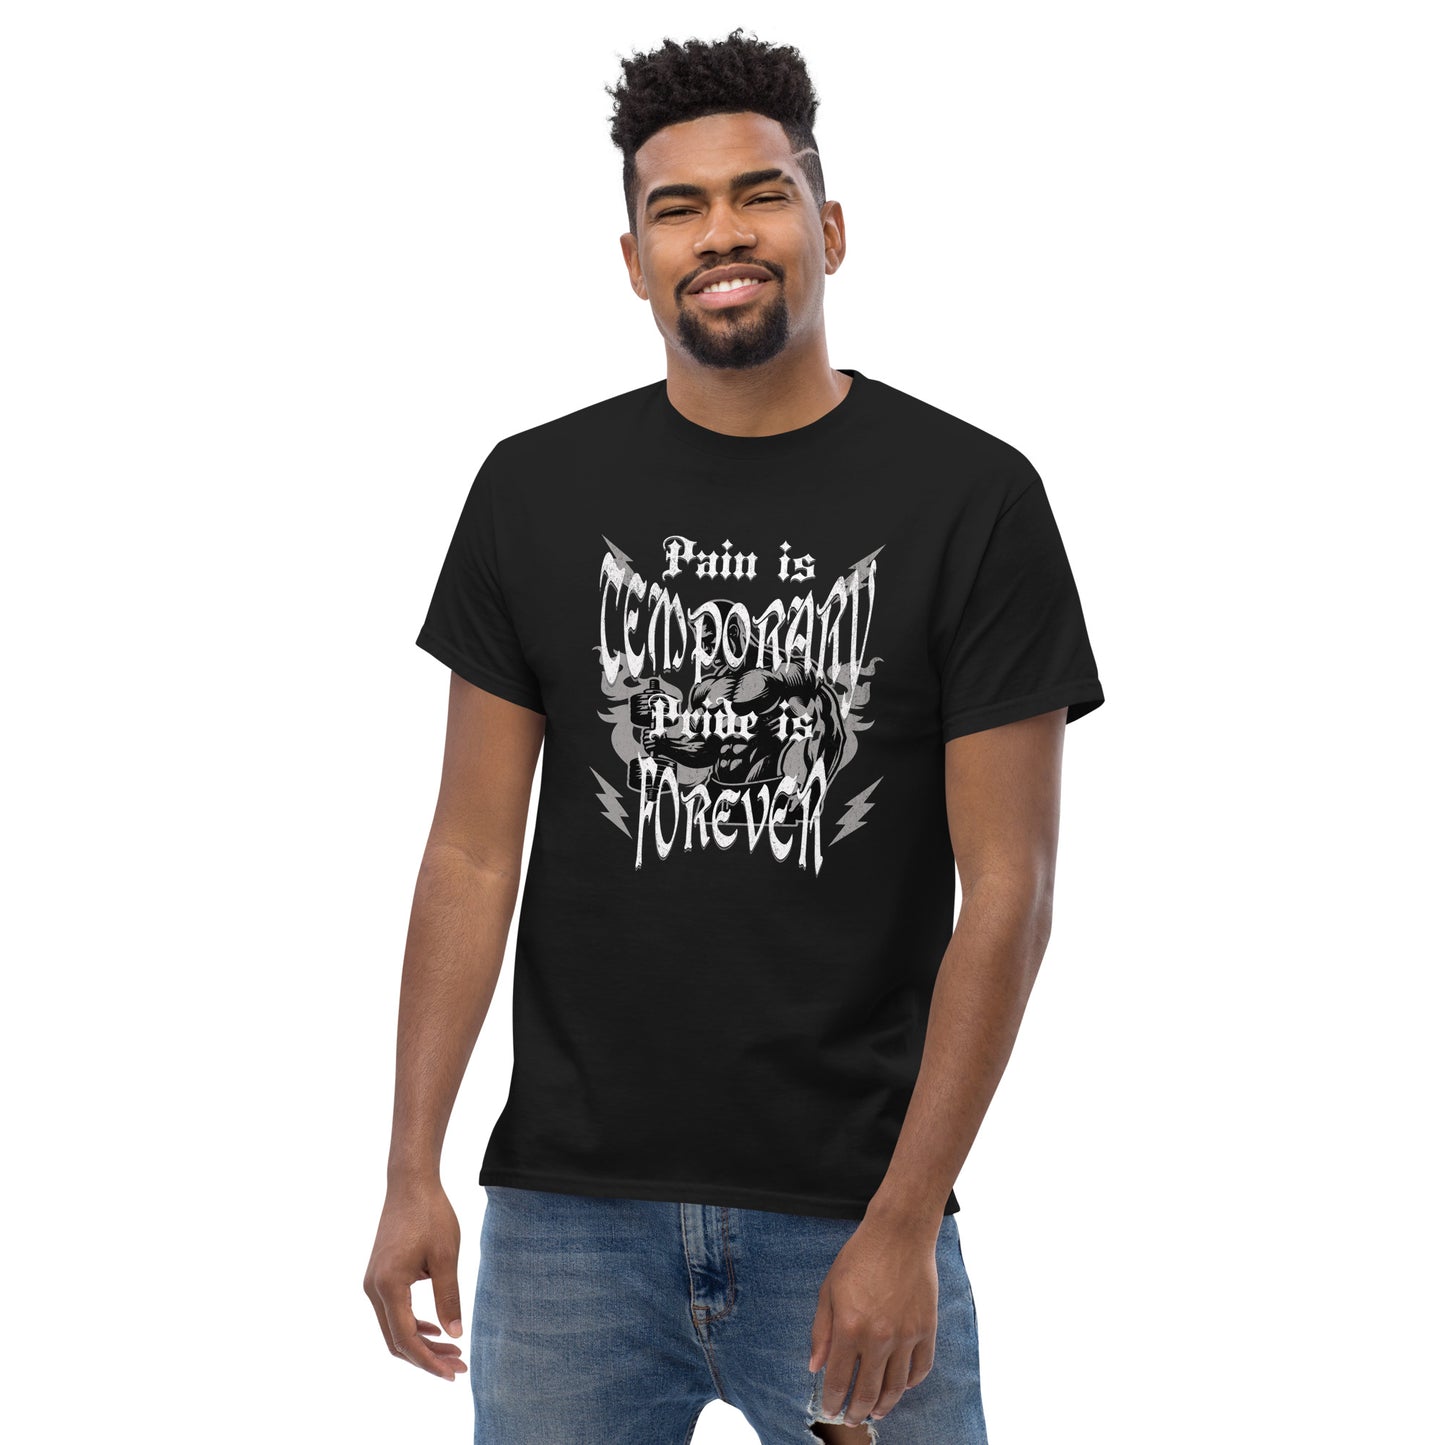 Pain is Temporary, Pride is Forever Men's T-Shirt - Black